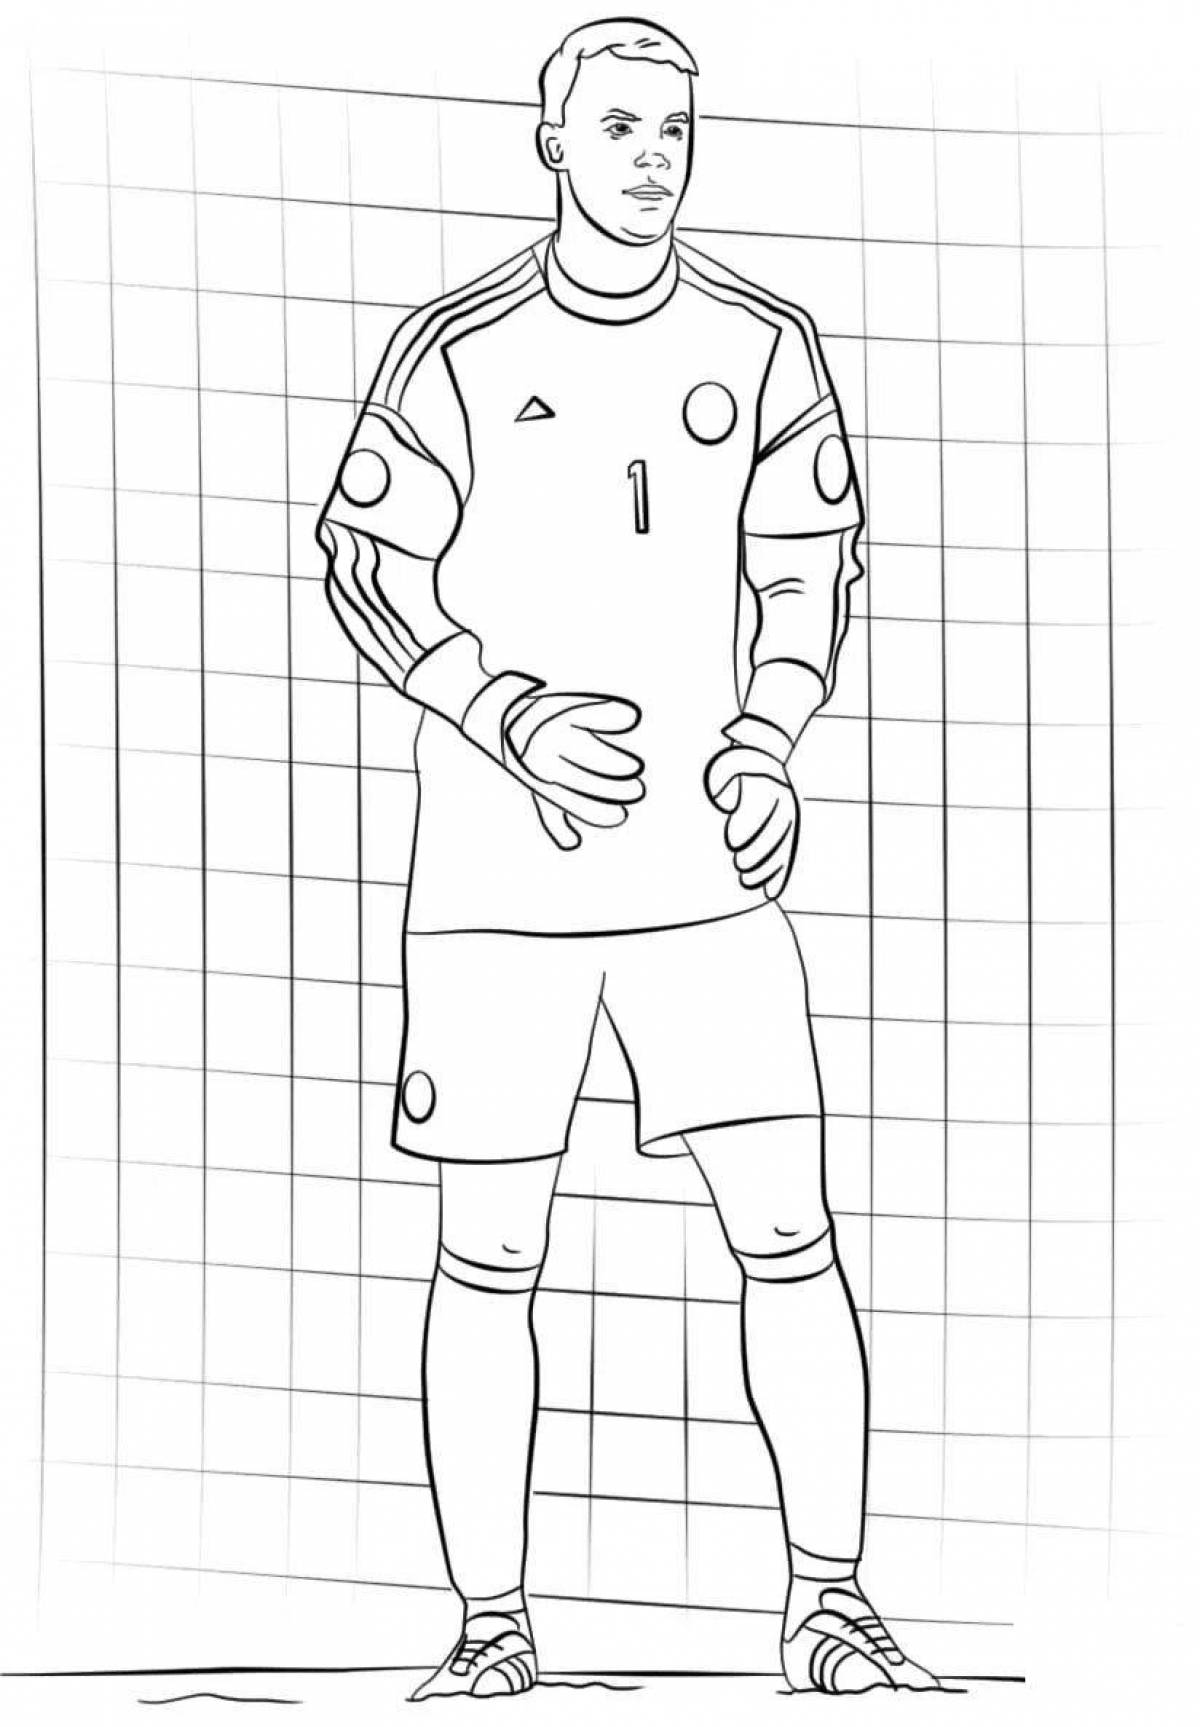 Coloring page nice football for boys